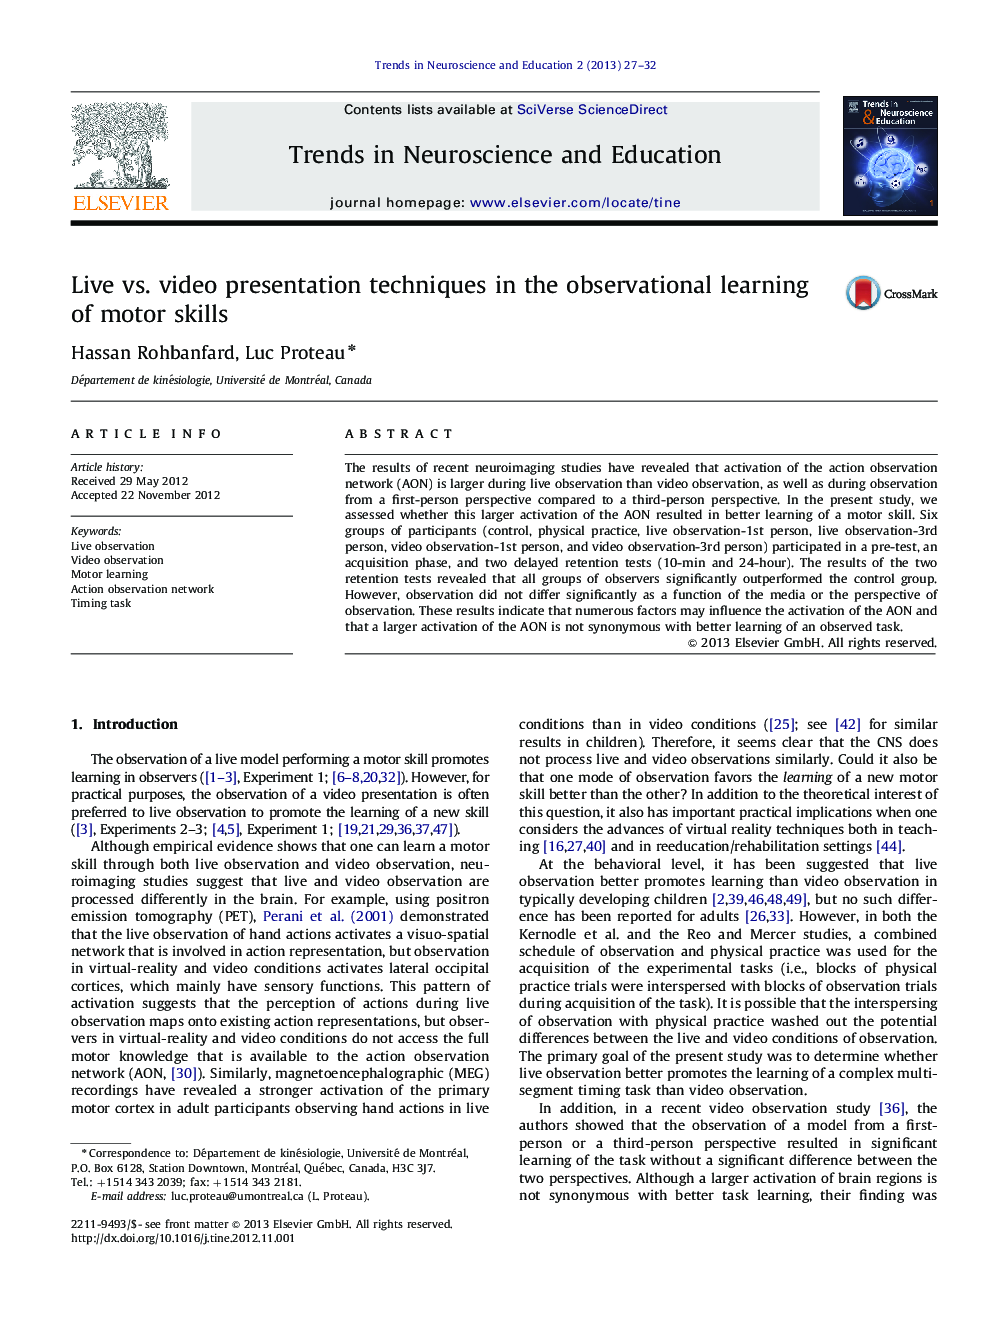 Live vs. video presentation techniques in the observational learning of motor skills